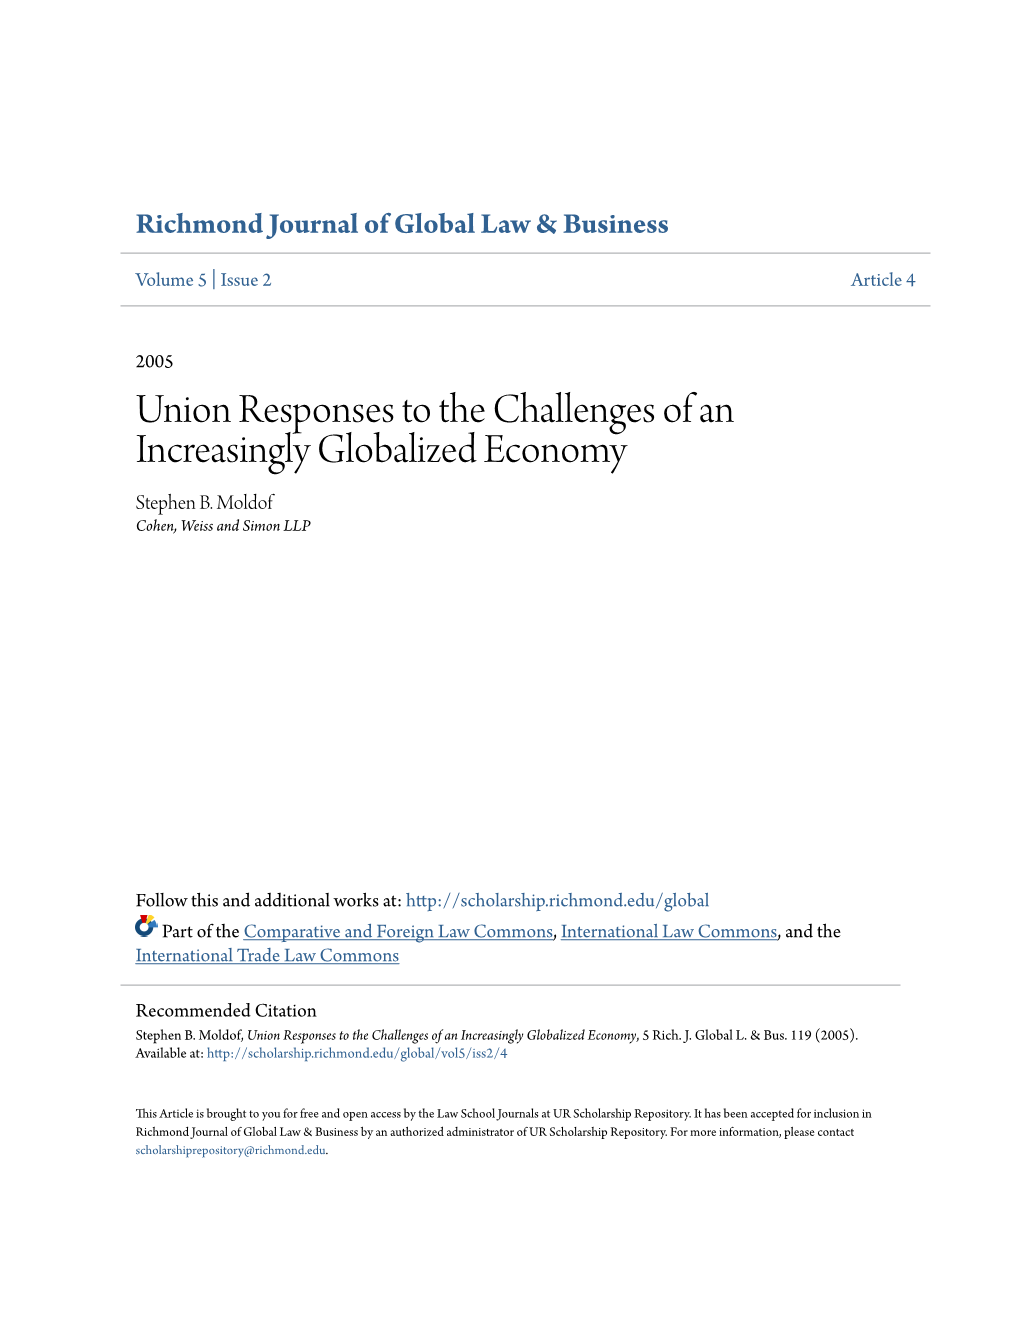 Union Responses to the Challenges of an Increasingly Globalized Economy Stephen B